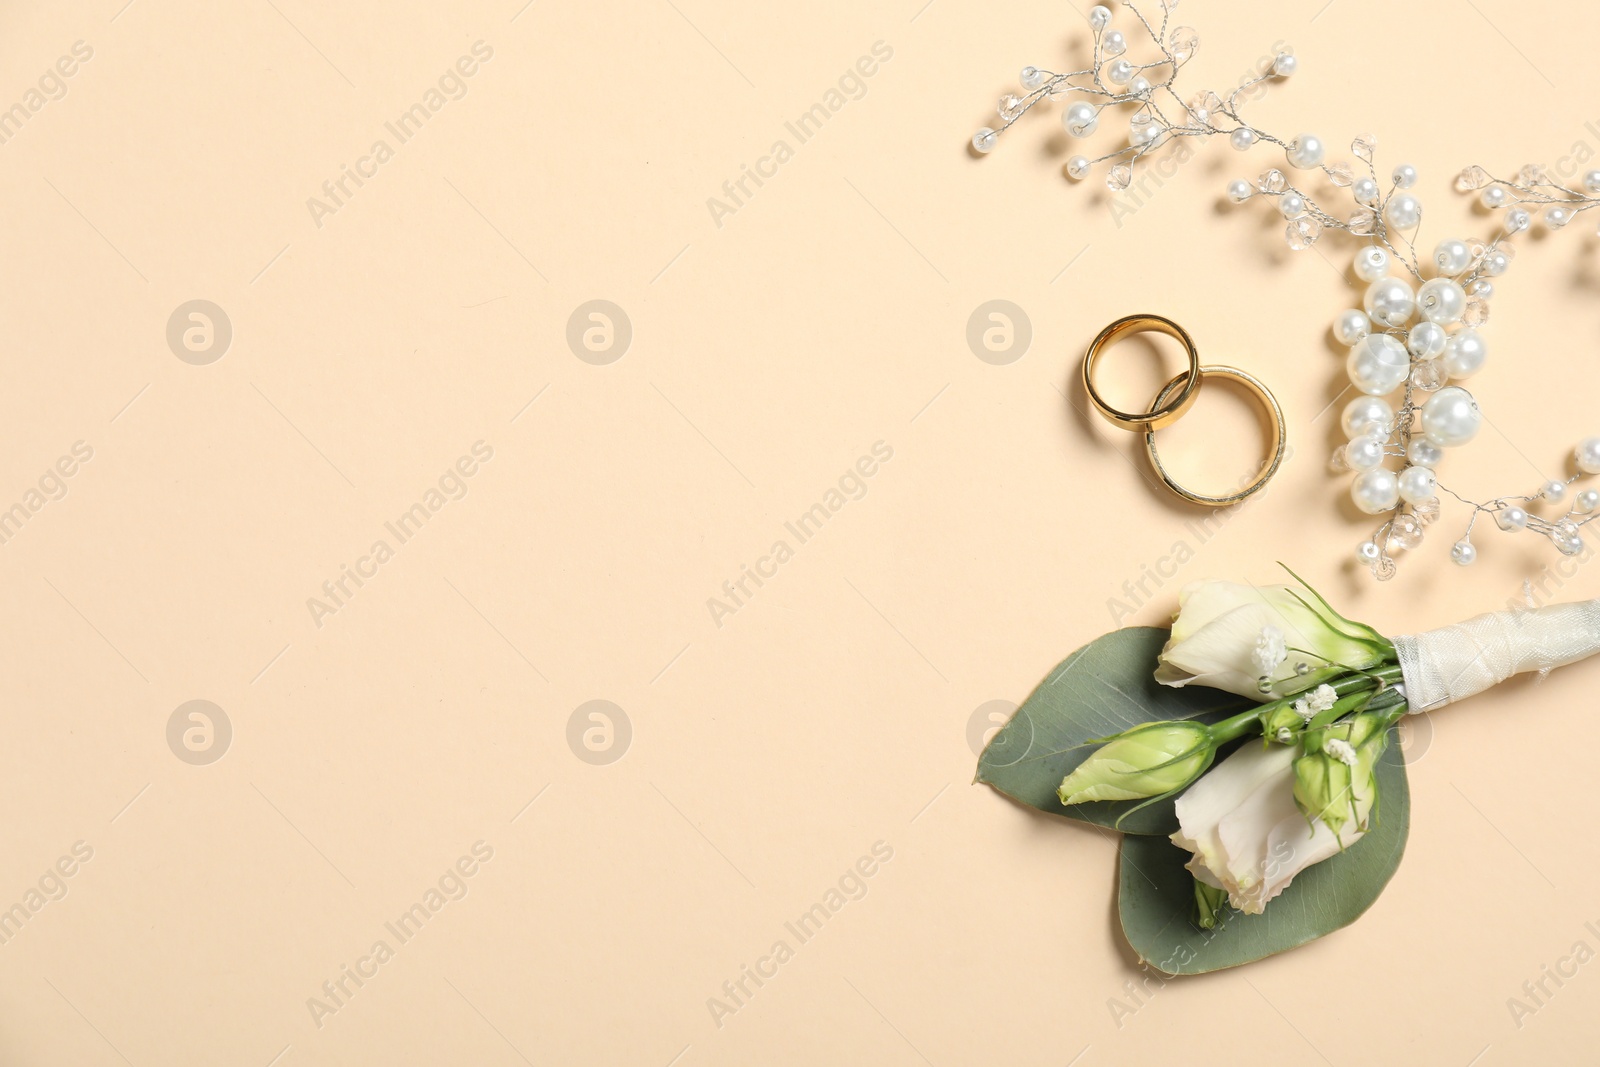 Photo of Wedding stuff. Stylish boutonniere, rings and decor on beige background, flat lay. Space for text